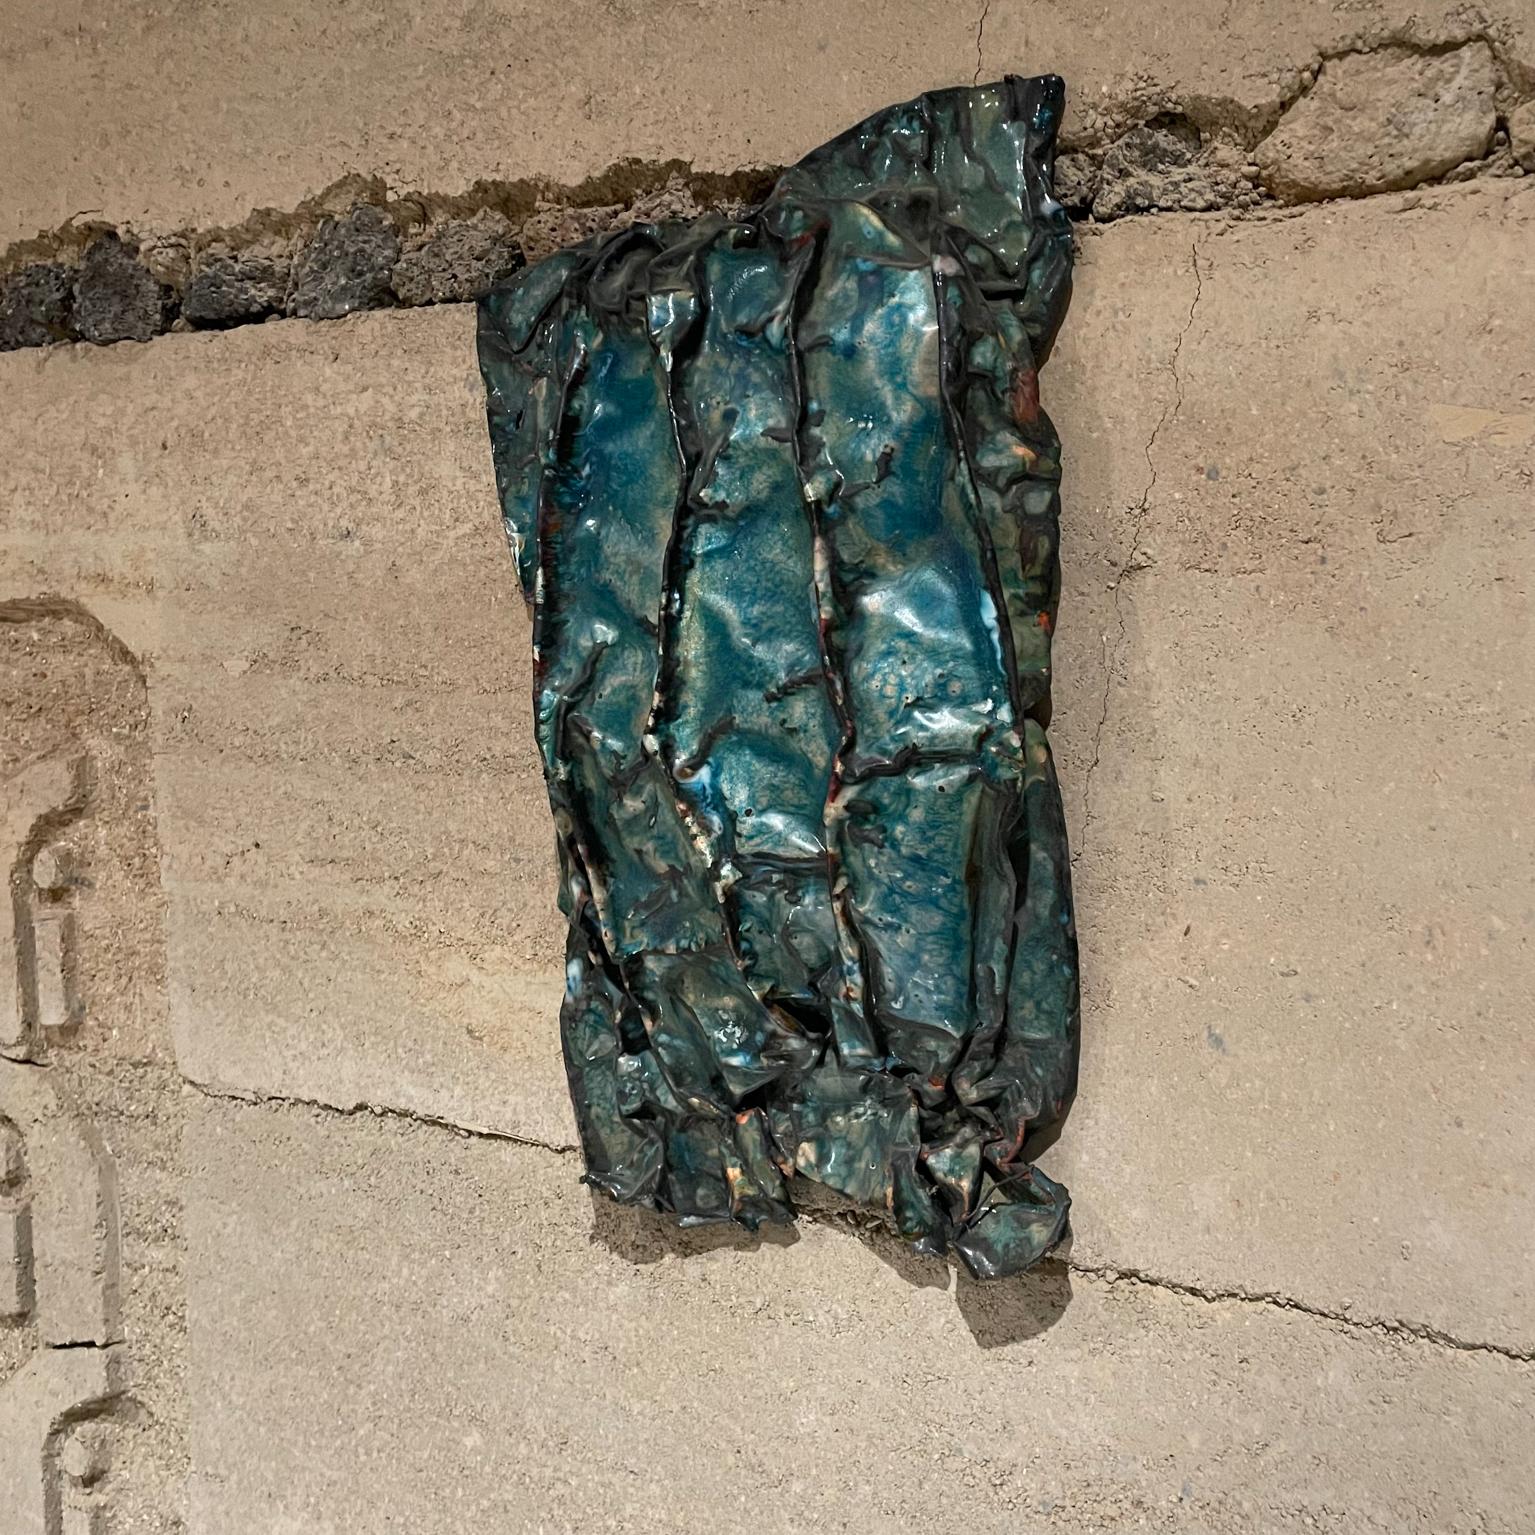 Wall Sculpture
1970s Abstract Sea Sculpture Enamel on Copper in Aqua Green by Joann Tanzer San Diego, California
Title: A View of the Sea  
In the artistic style of Aldo Chaparro tortured expressionism
14.5 W x 3.5 D x 21.5 tall
Original unrestored